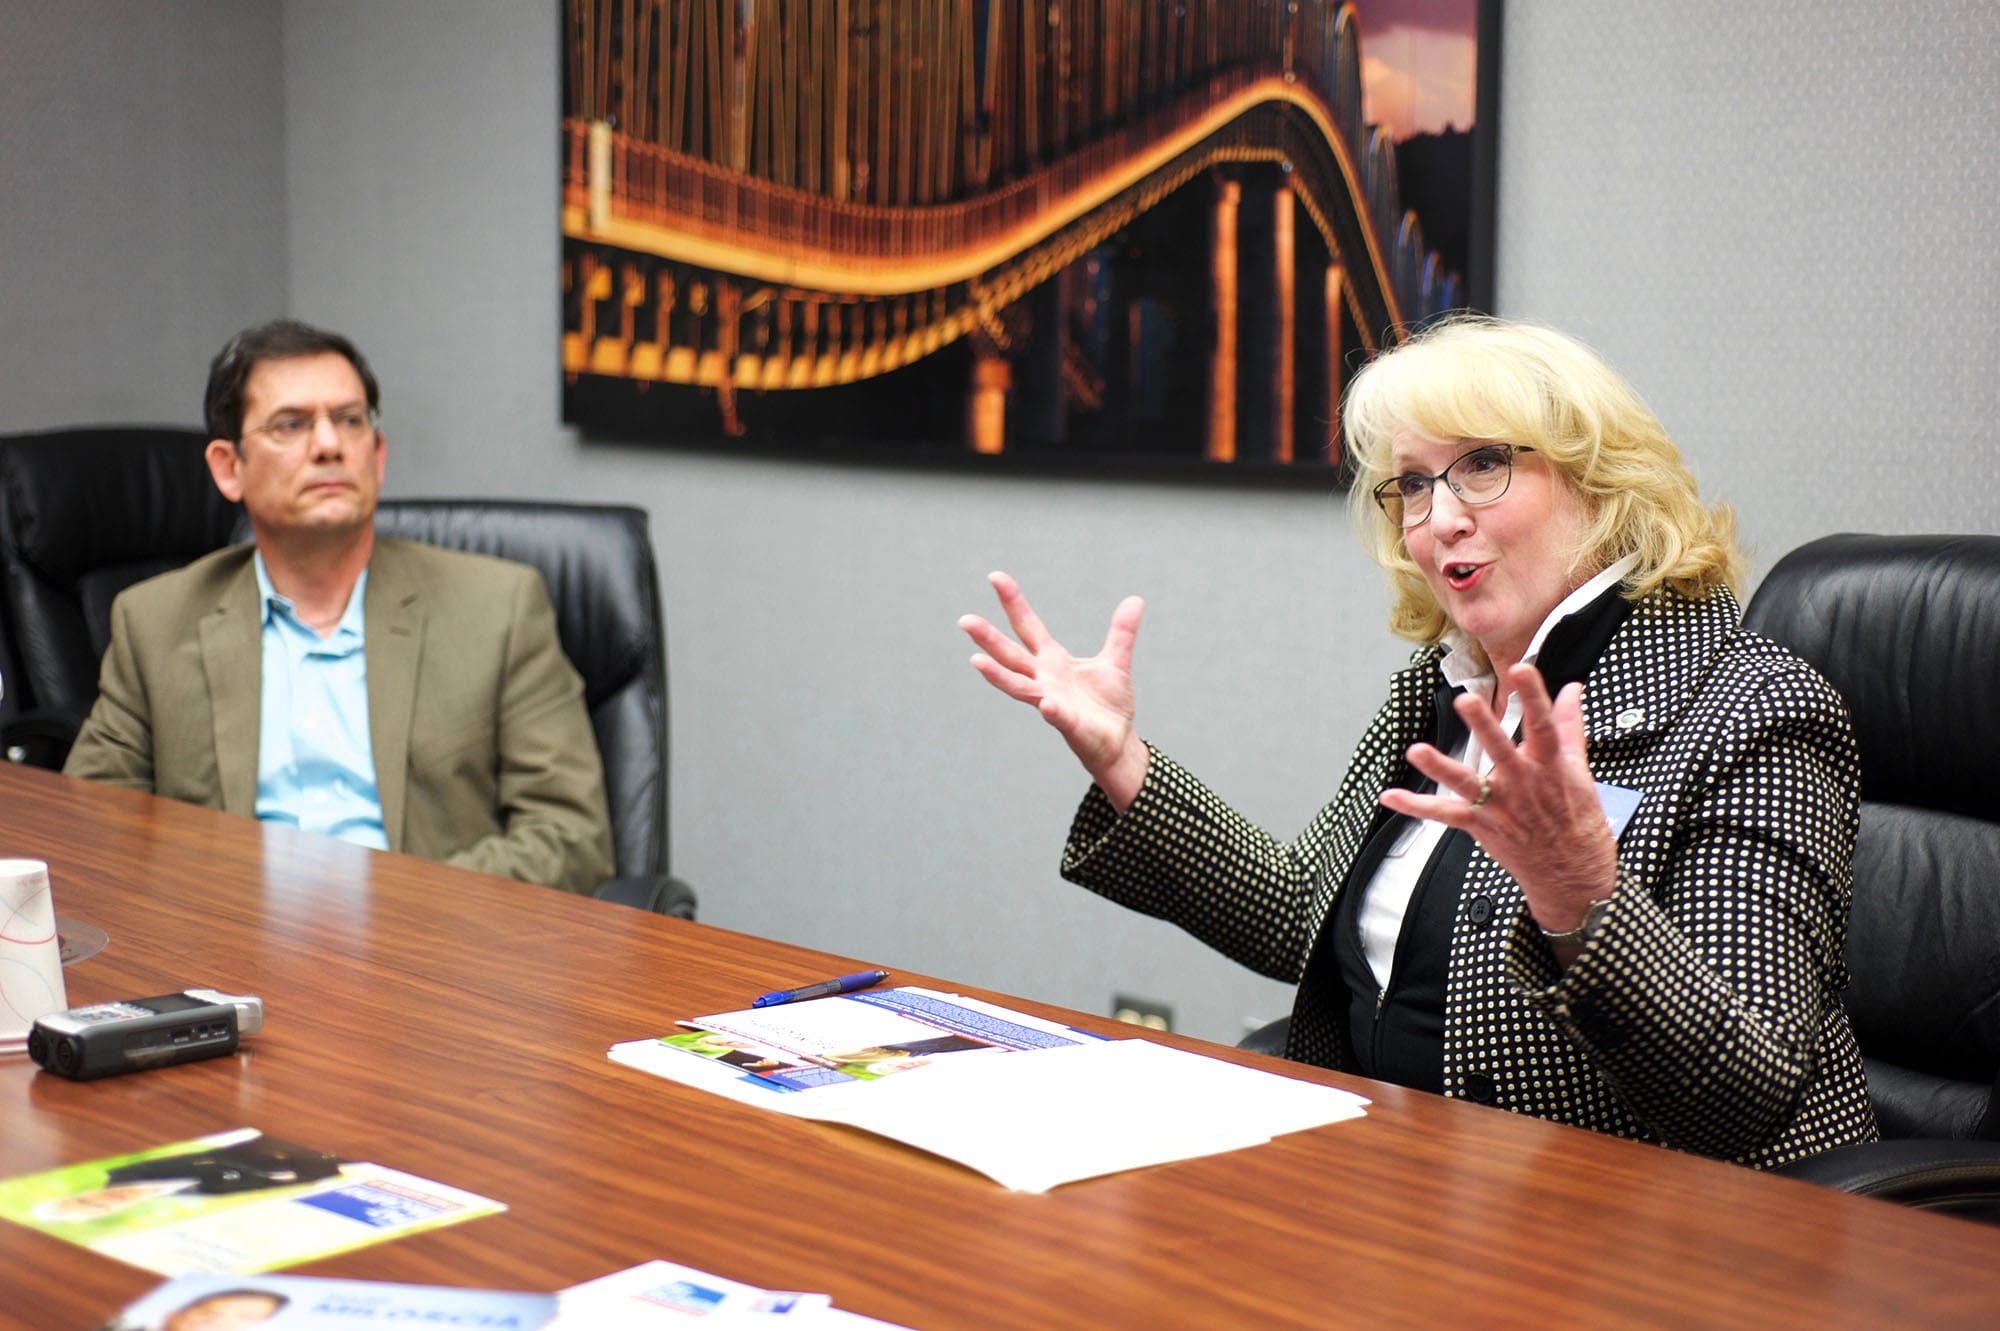 State Sen. Mark Miloscia, R-Federal Way, left, and Pierce County Auditor Pat McCarthy, a Democrat, talk Tuesday, Oct. 11, 2016, with The Columbian editorial board. The two are running for State Auditor.